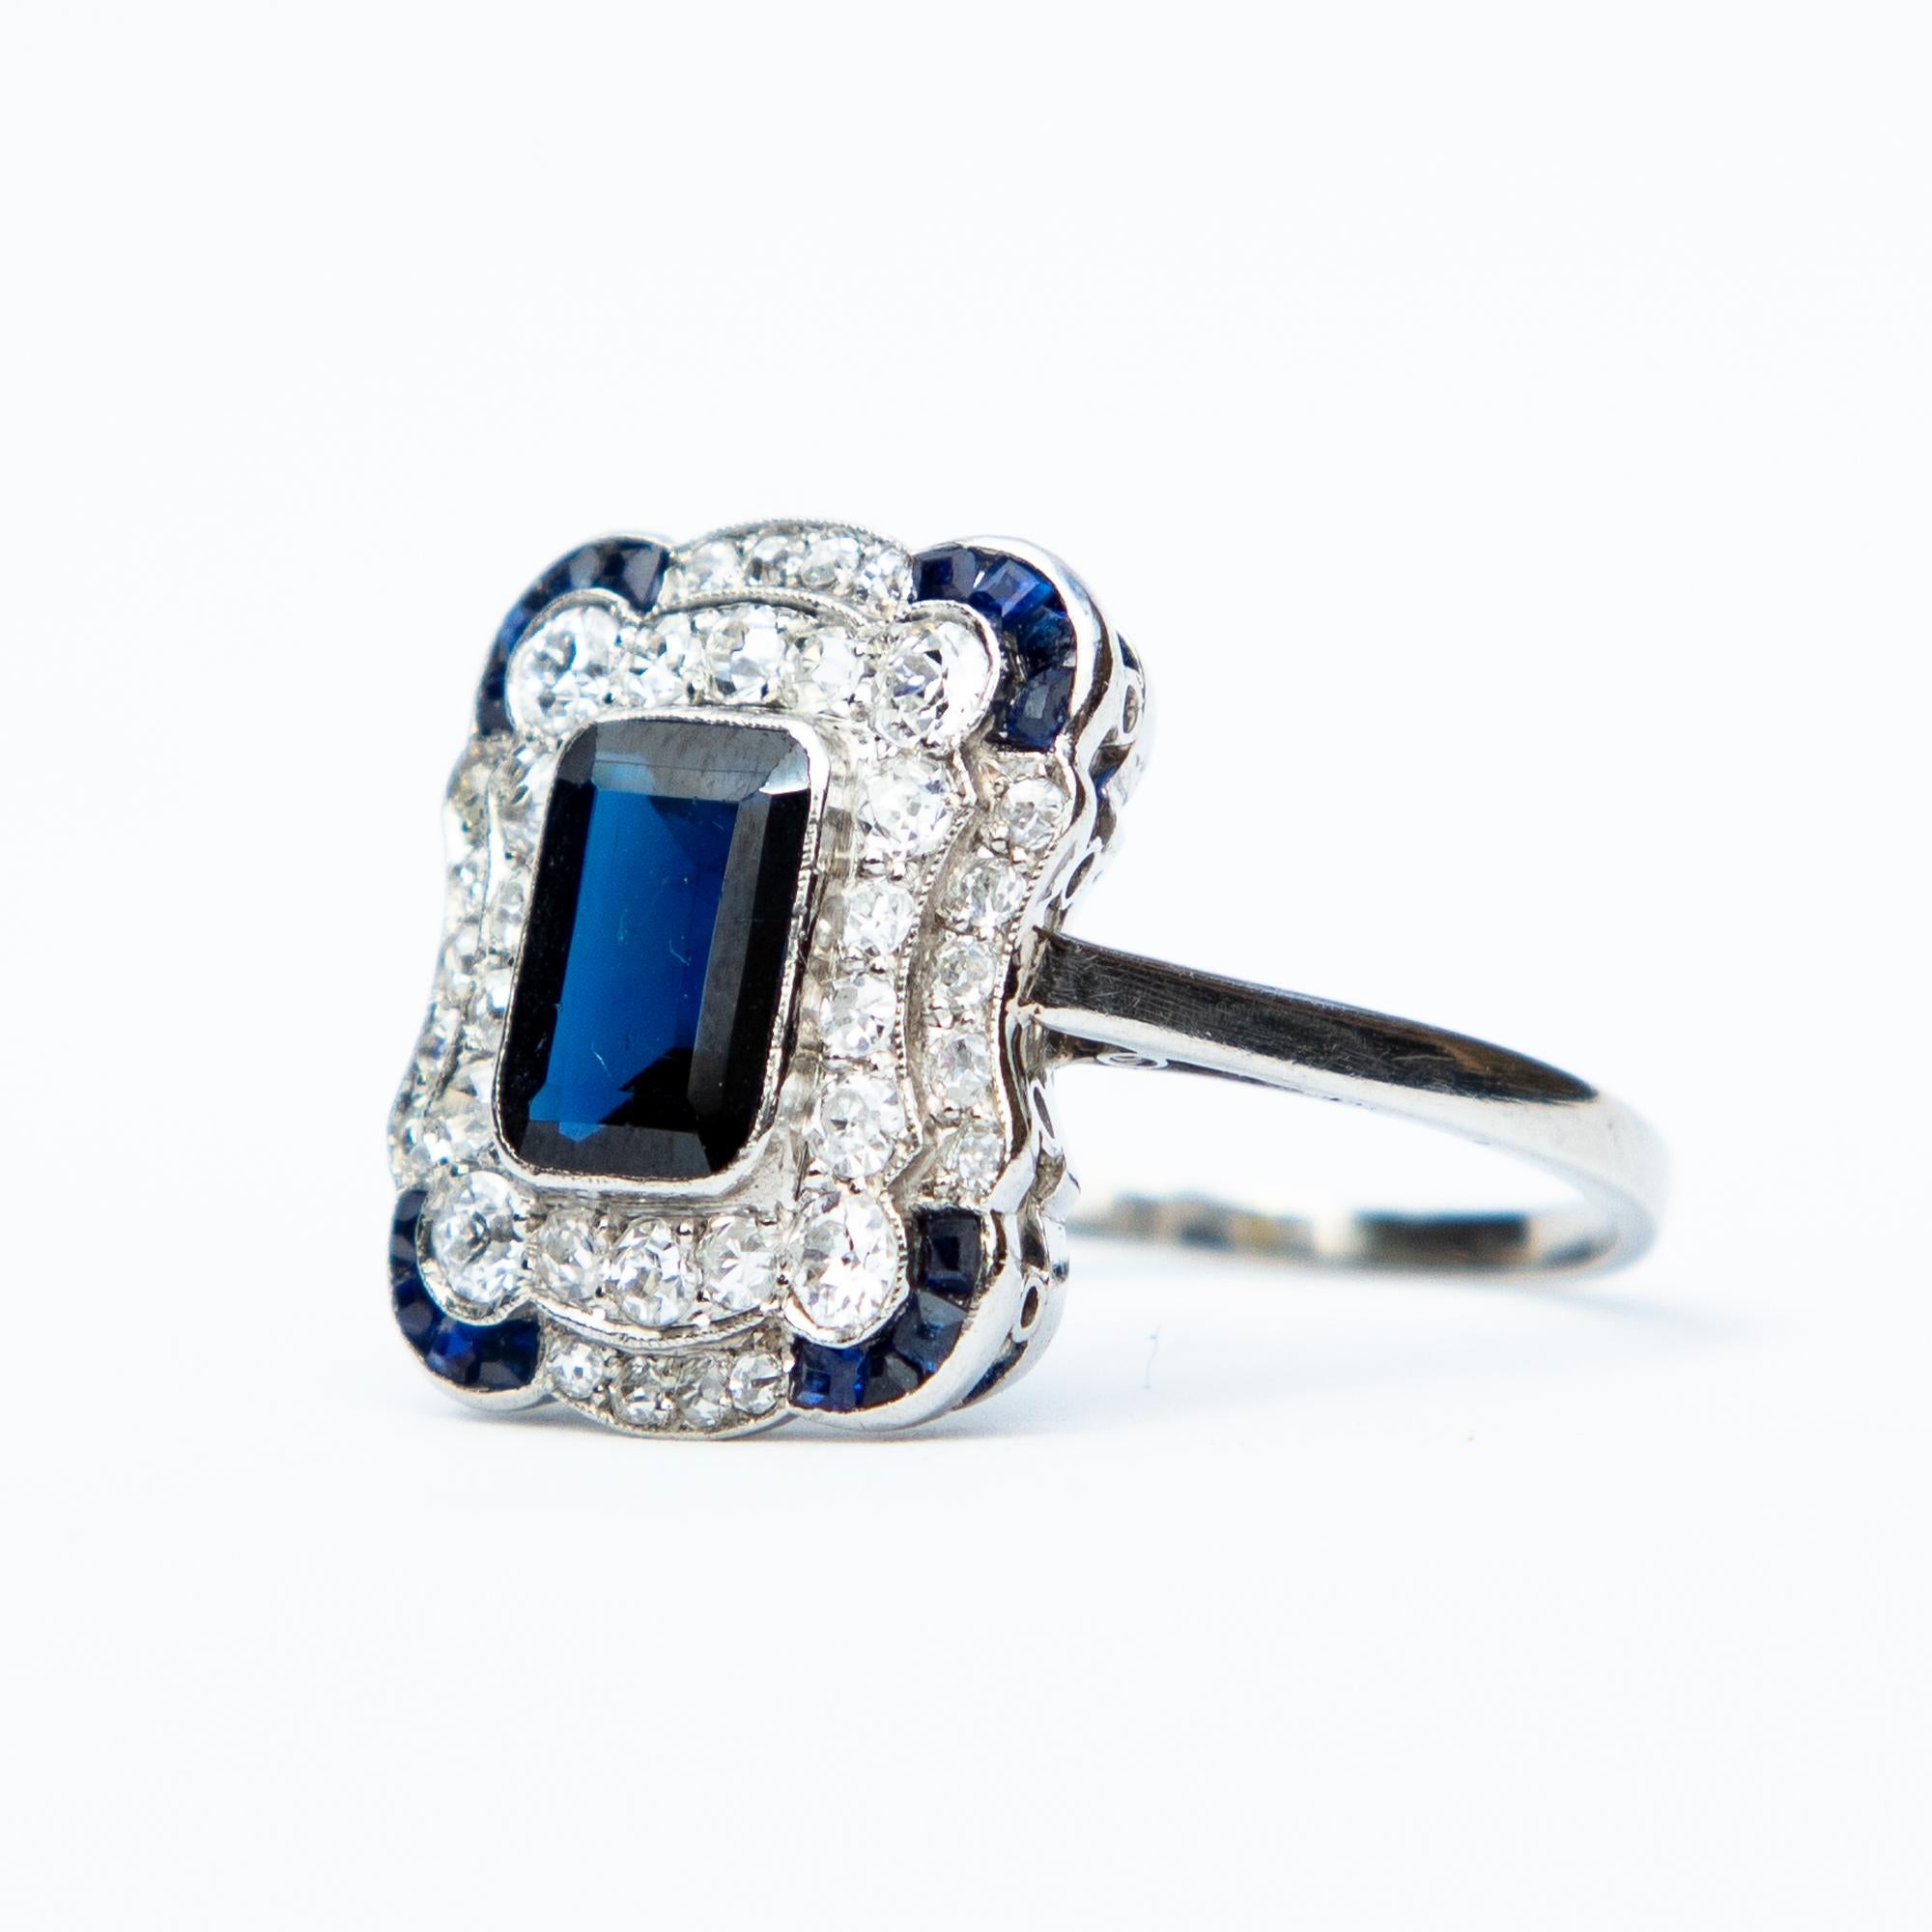 A spectacular example of an Art Deco Diamond and Natural Sapphire ring. 
The central sapphire measures just over 1 carat, surrounded by old European cut Diamonds and sapphire accented corners. This wonderful piece is Platinum set.
The Diamonds are H